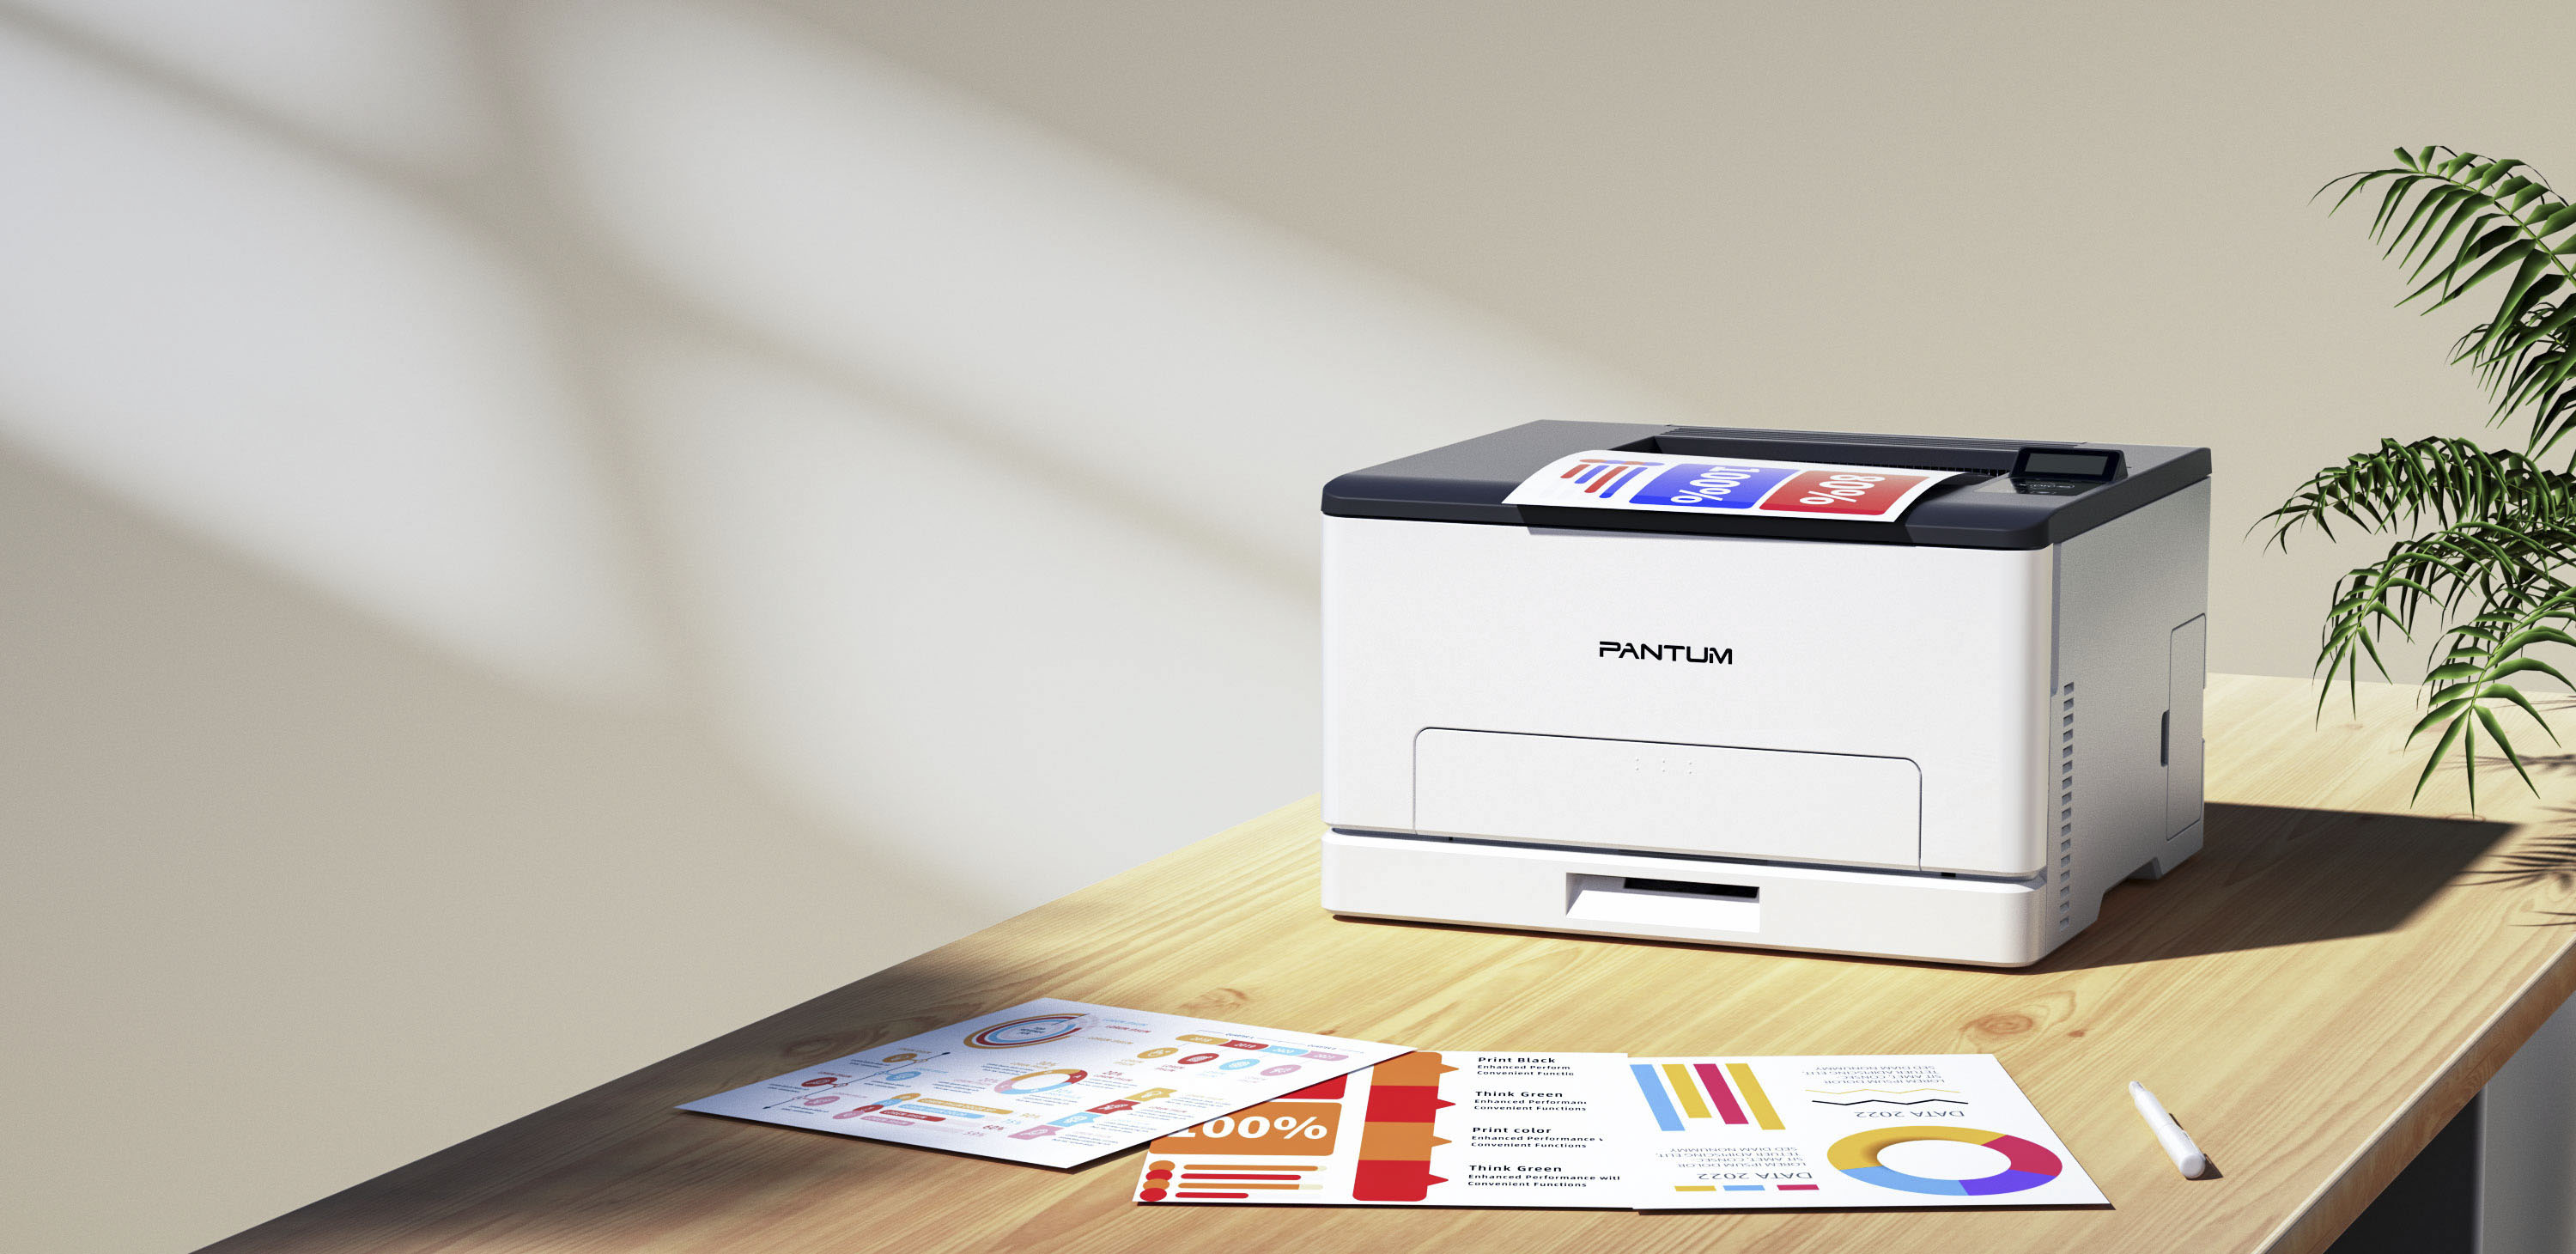 Pantum Printers in Nepal: The Best Budget-Friendly Printers for Home and Office, with Guaranteed Satisfaction